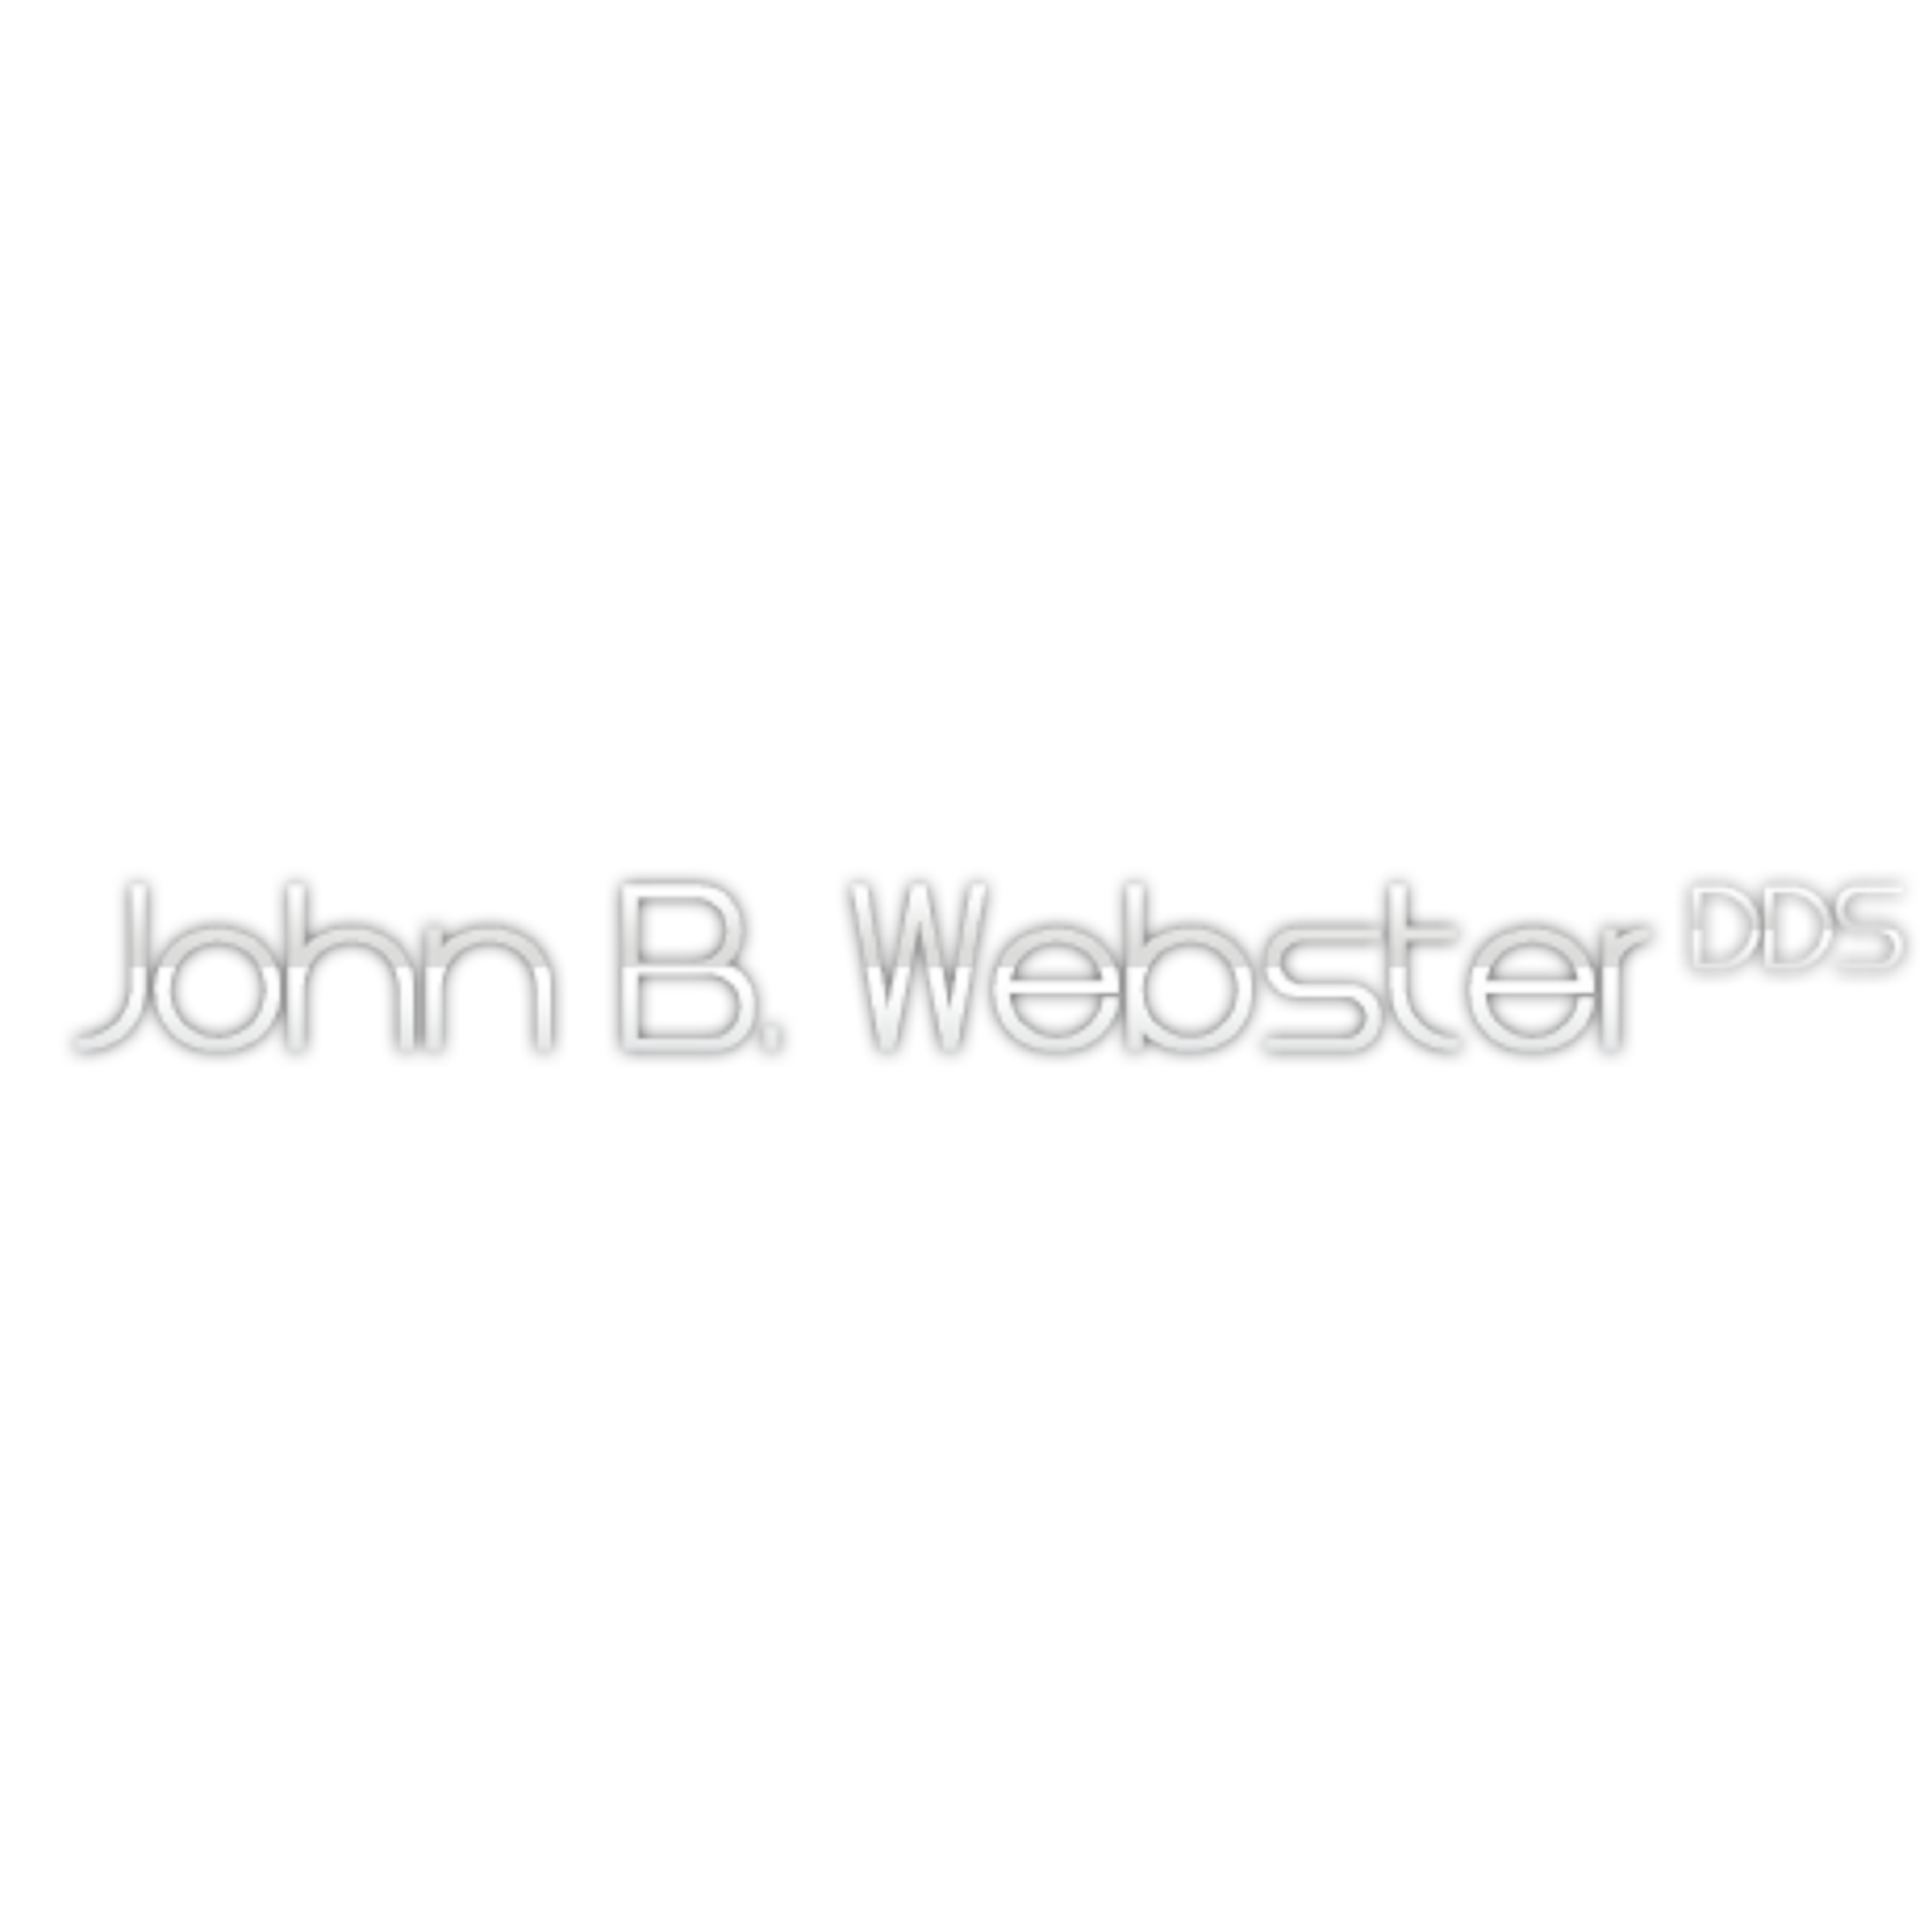 Webster John B DDS - Mansfield, OH 44902 - (419)525-1556 | ShowMeLocal.com